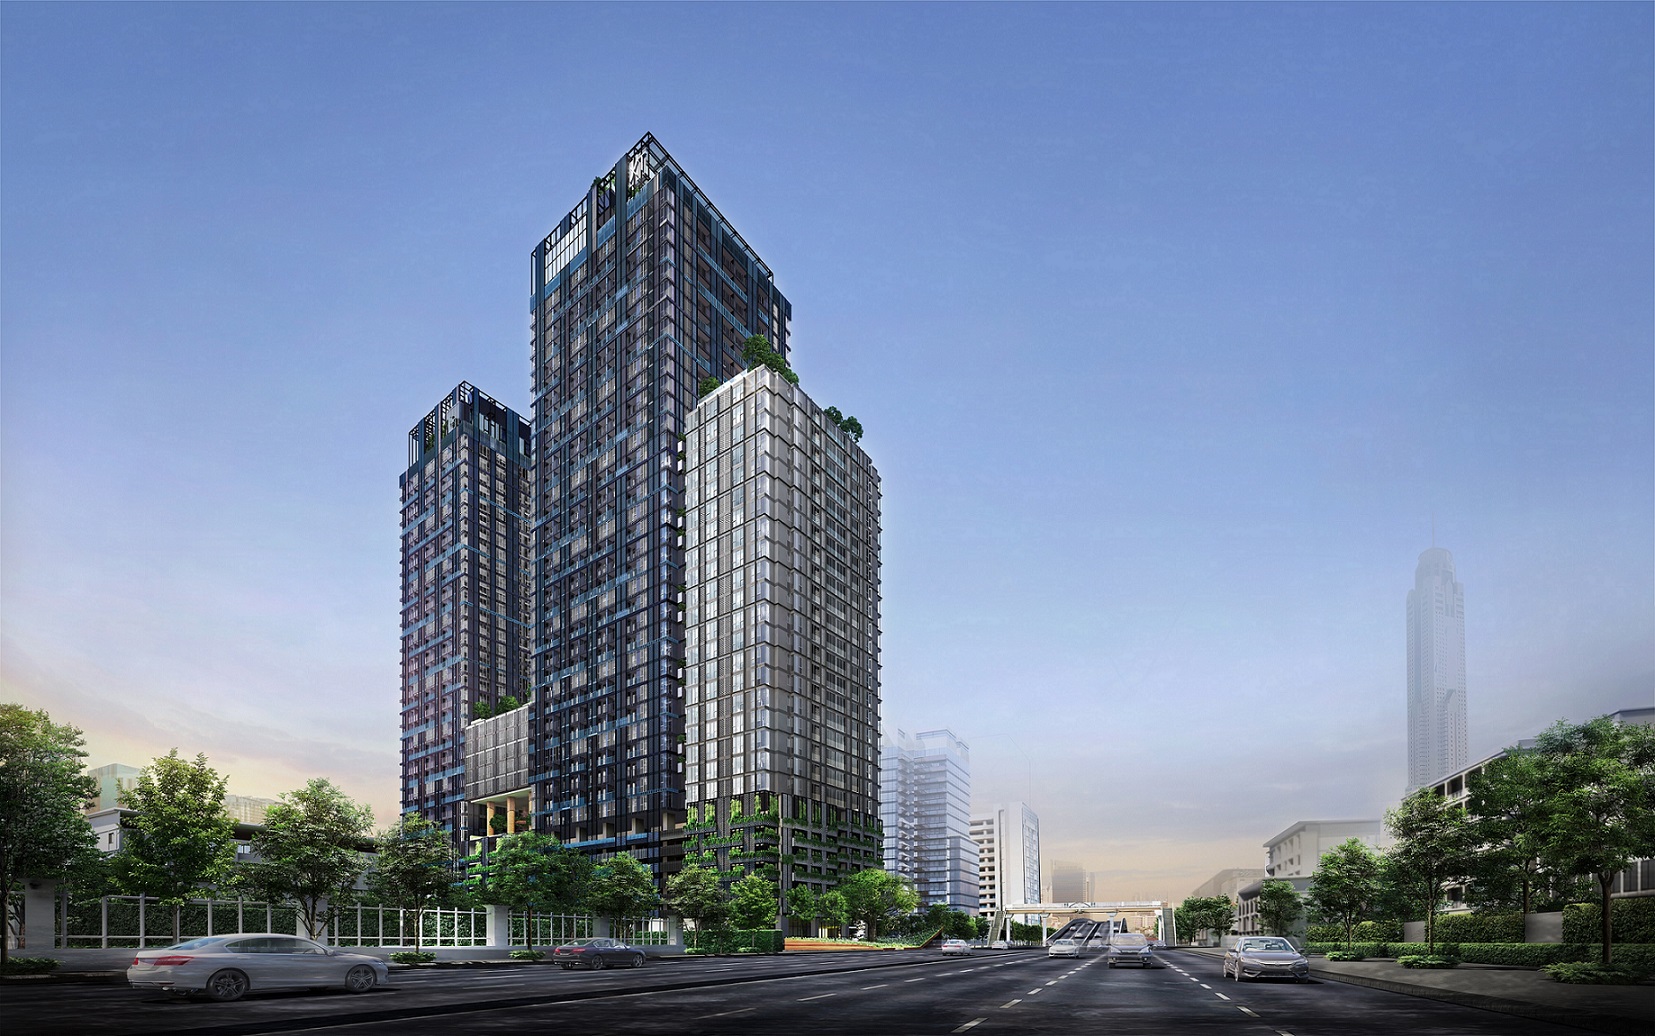 [Site Visit] XT Phayathai by Sansiri - Launching Soon. Register For VVIP Preview and Early Bird Discounts. Download Price List, Floor Plan, E-Brochure.